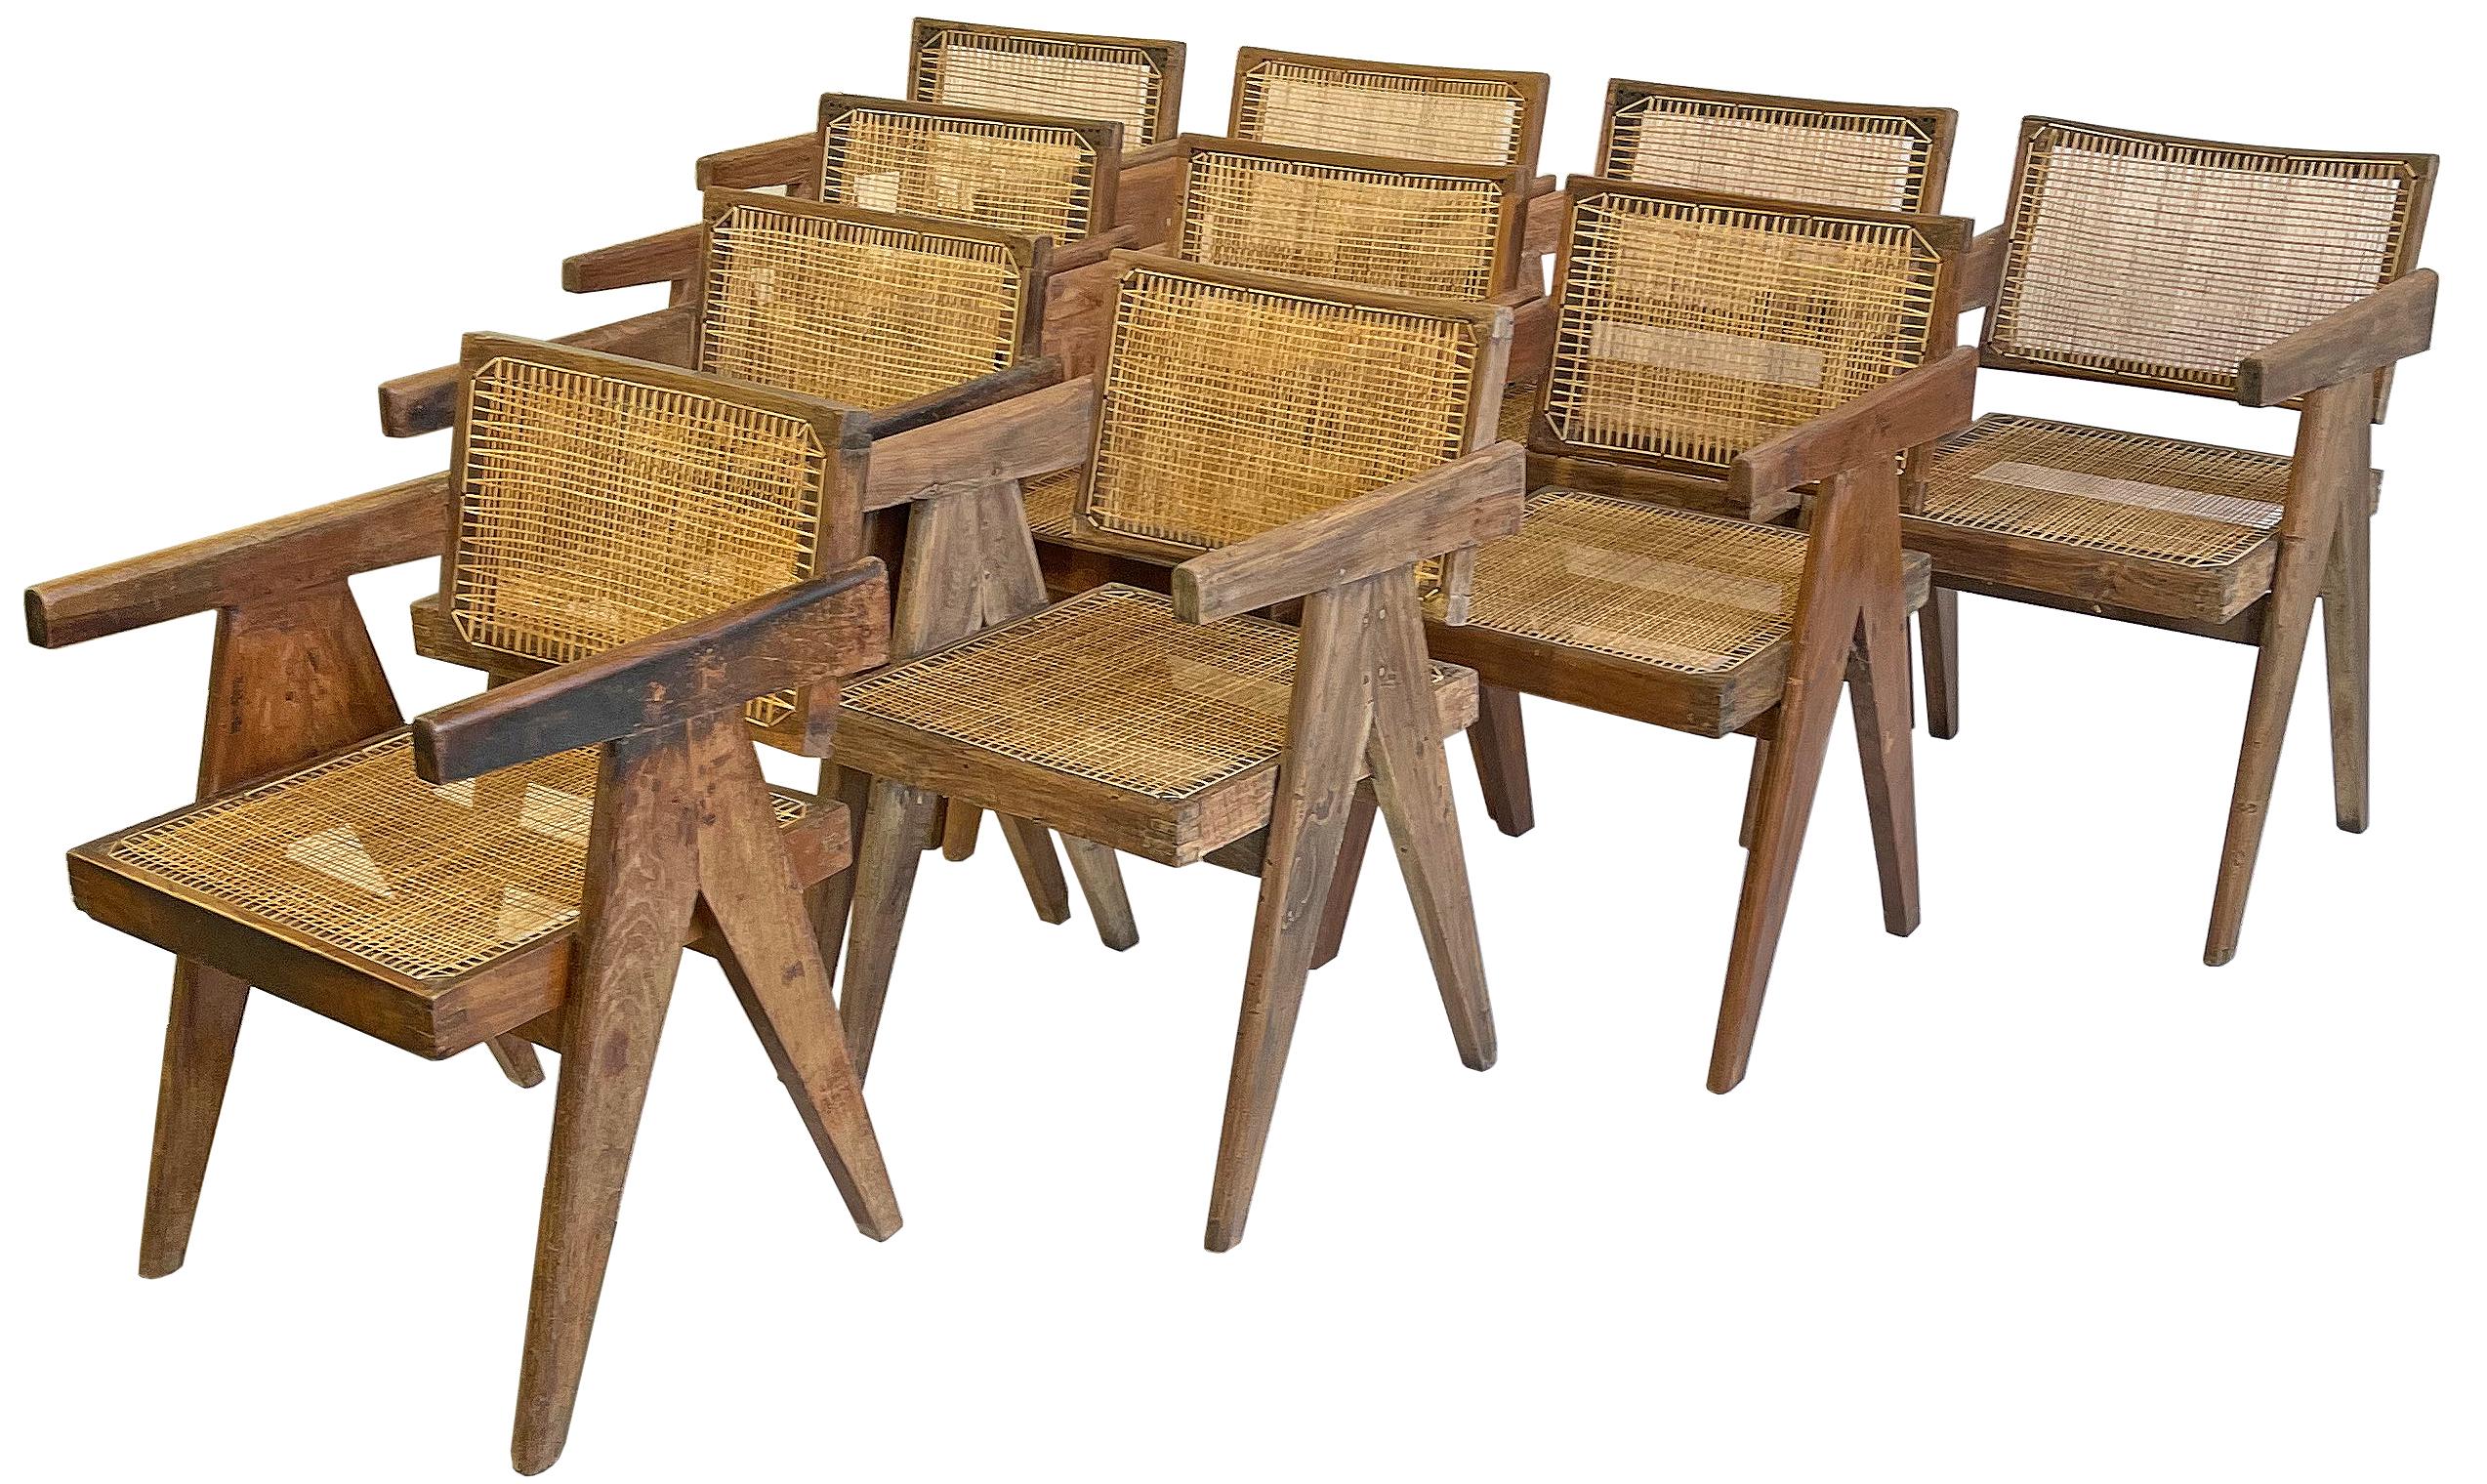 A very nice true matched set of Pierre Jeanneret PJ-SI-28-A 